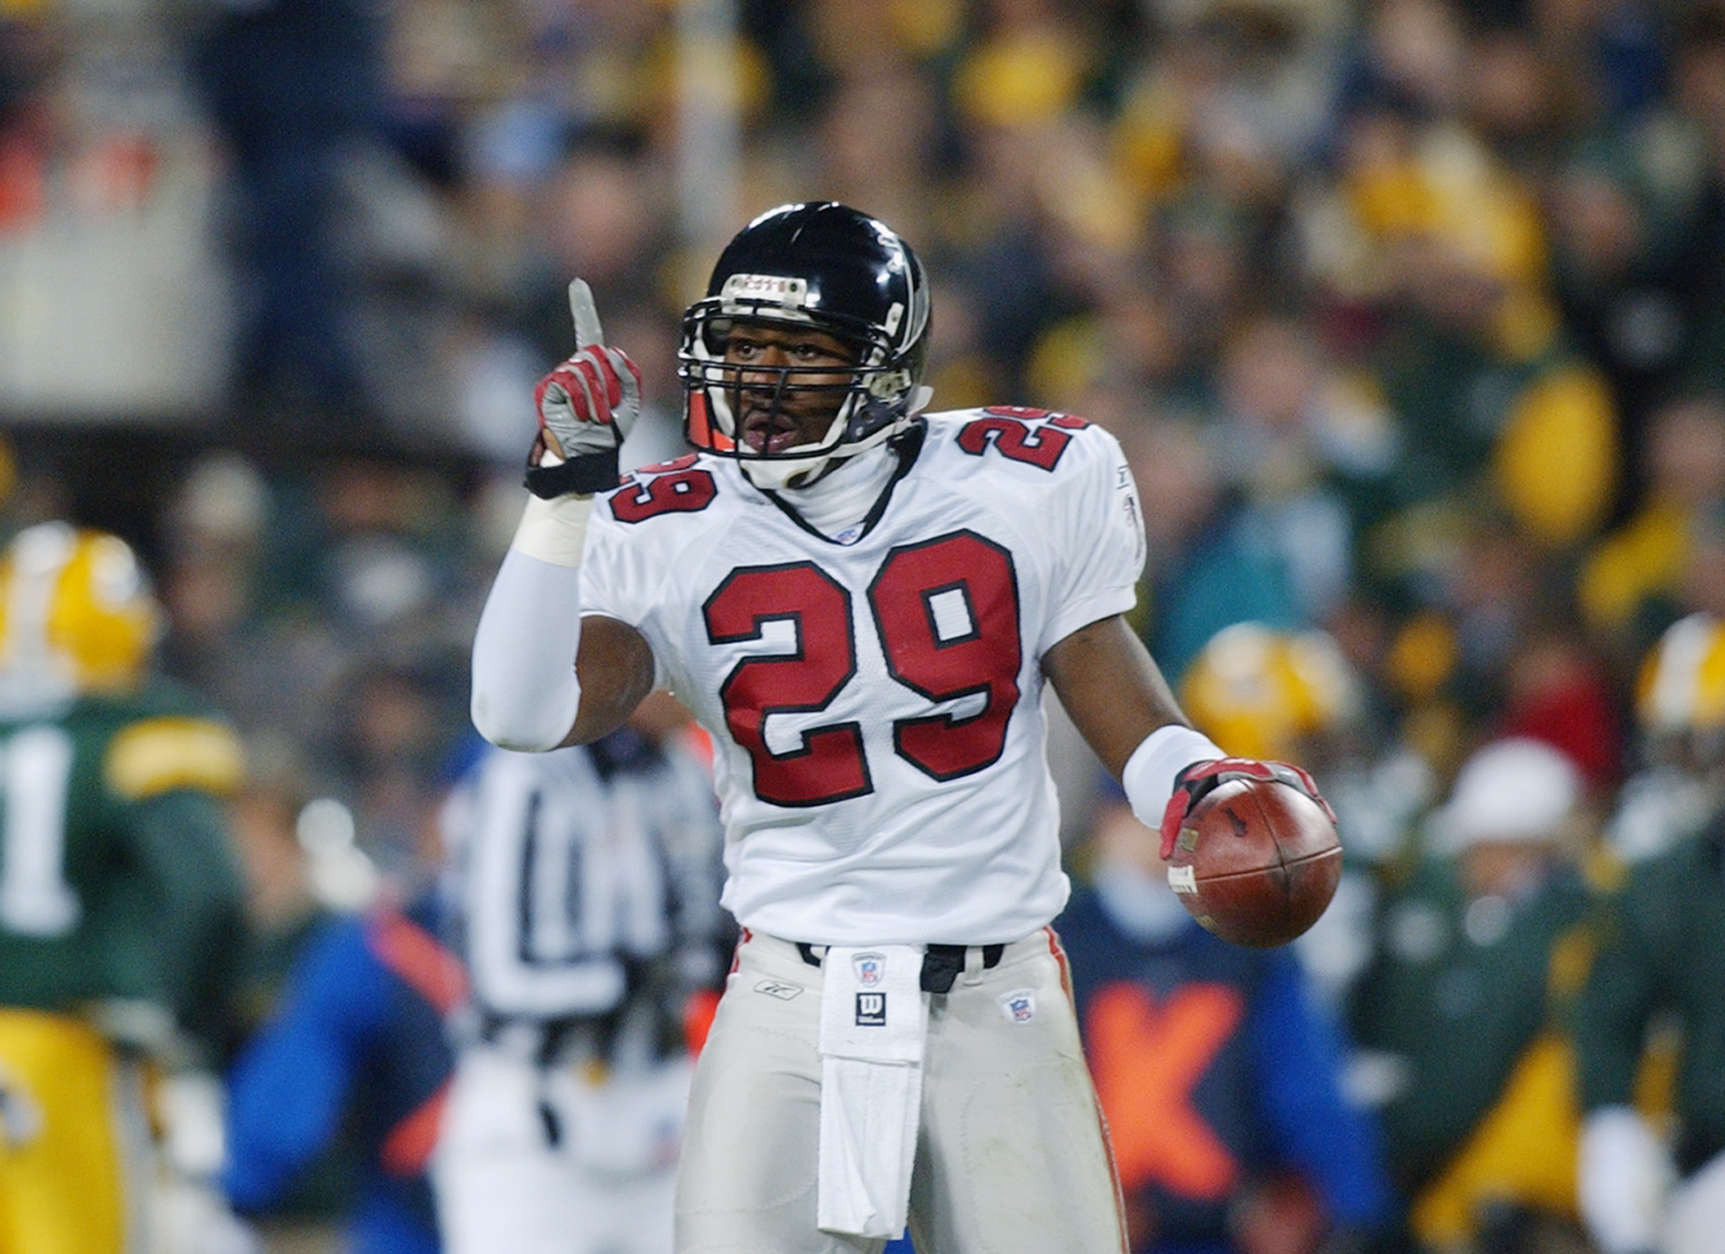 GREEN BAY, WI - JANUARY 4:  Keion Carpenter #29 of the Atlanta Falcons points to the sky as he celebrates after intercepting a pass against the Green Bay Packers at 8:33 of the first quarter of the NFC Wildcard game on January 4, 2002 at Lambeau Field in Green Bay, Wisconsin.  (Photo by Jonathan Daniel/Getty Images)